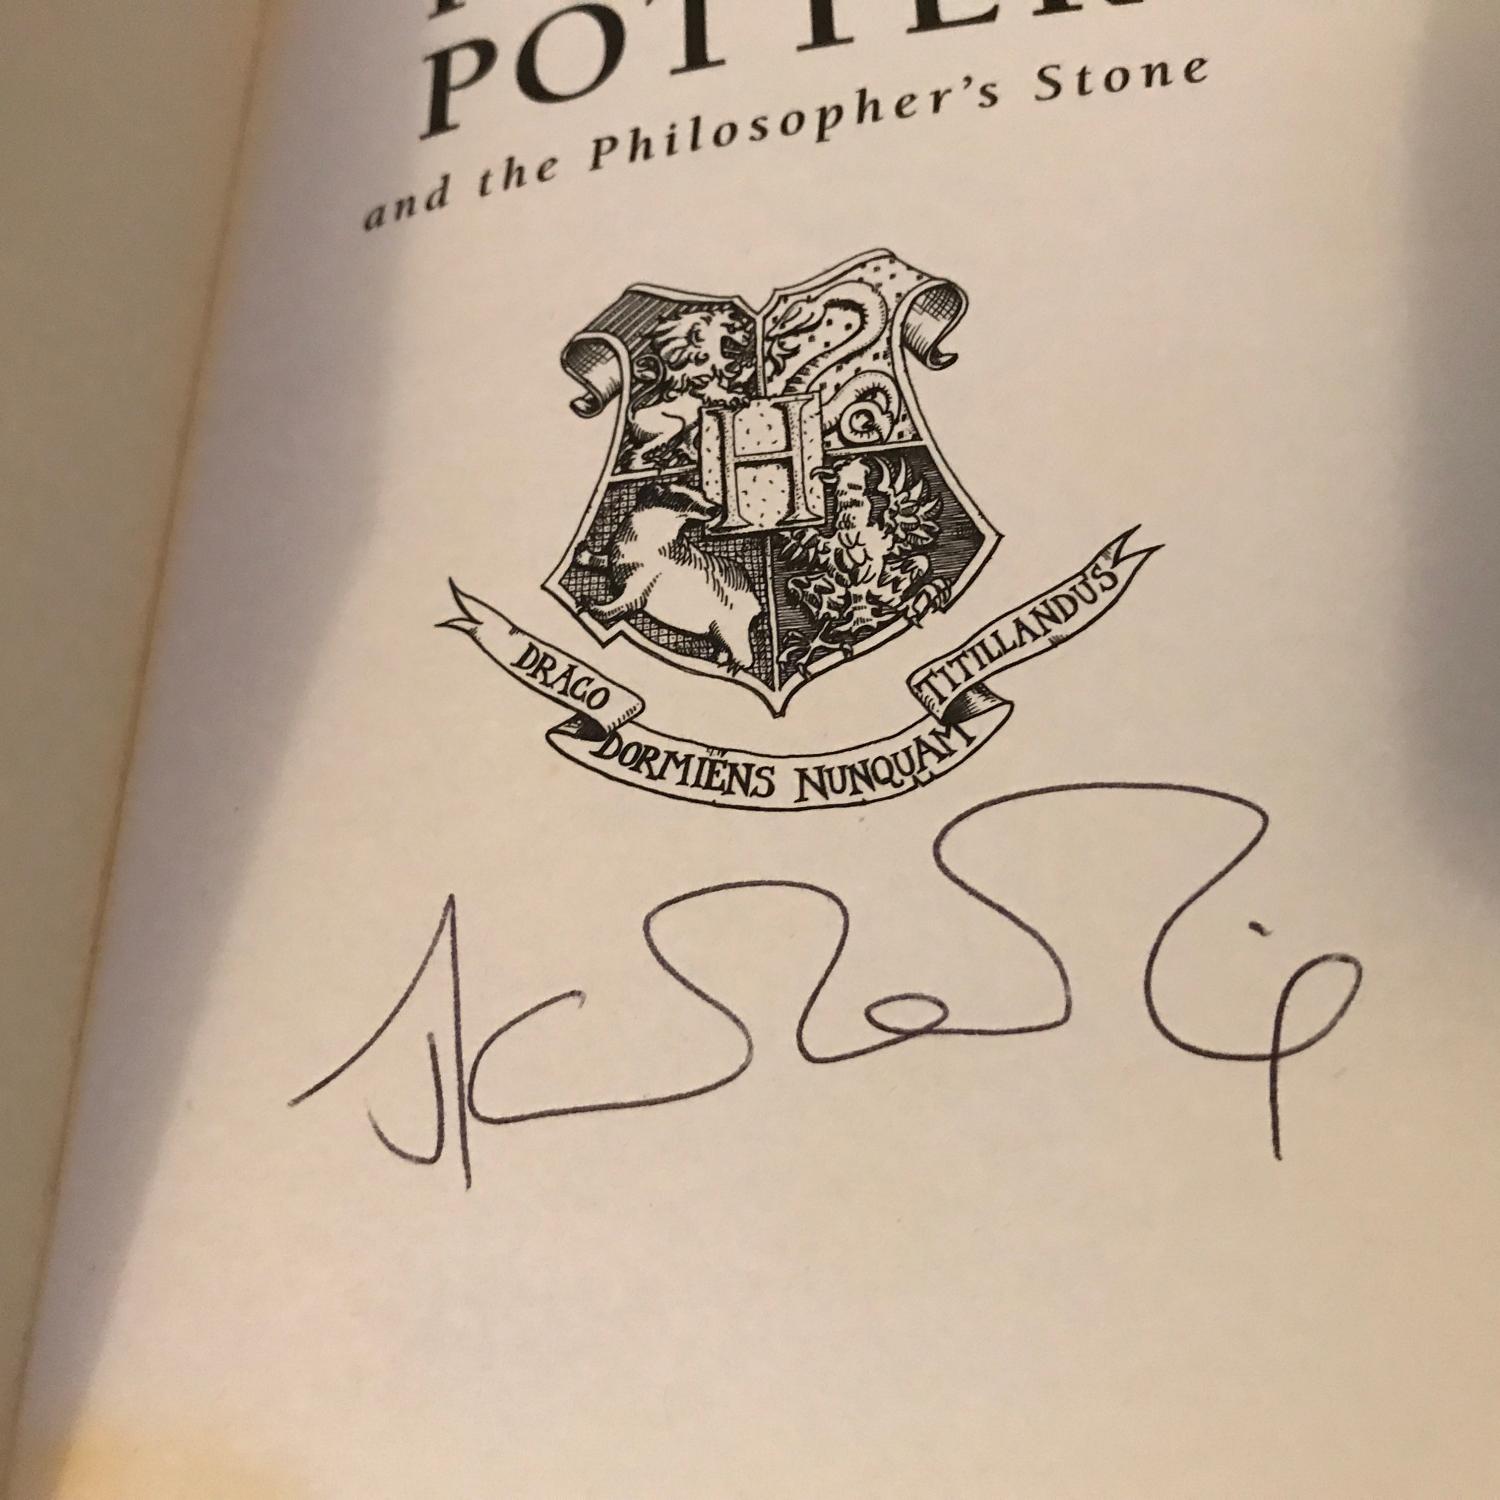 JK Rowling forgery being sold by CWO Books on Abebooks.com